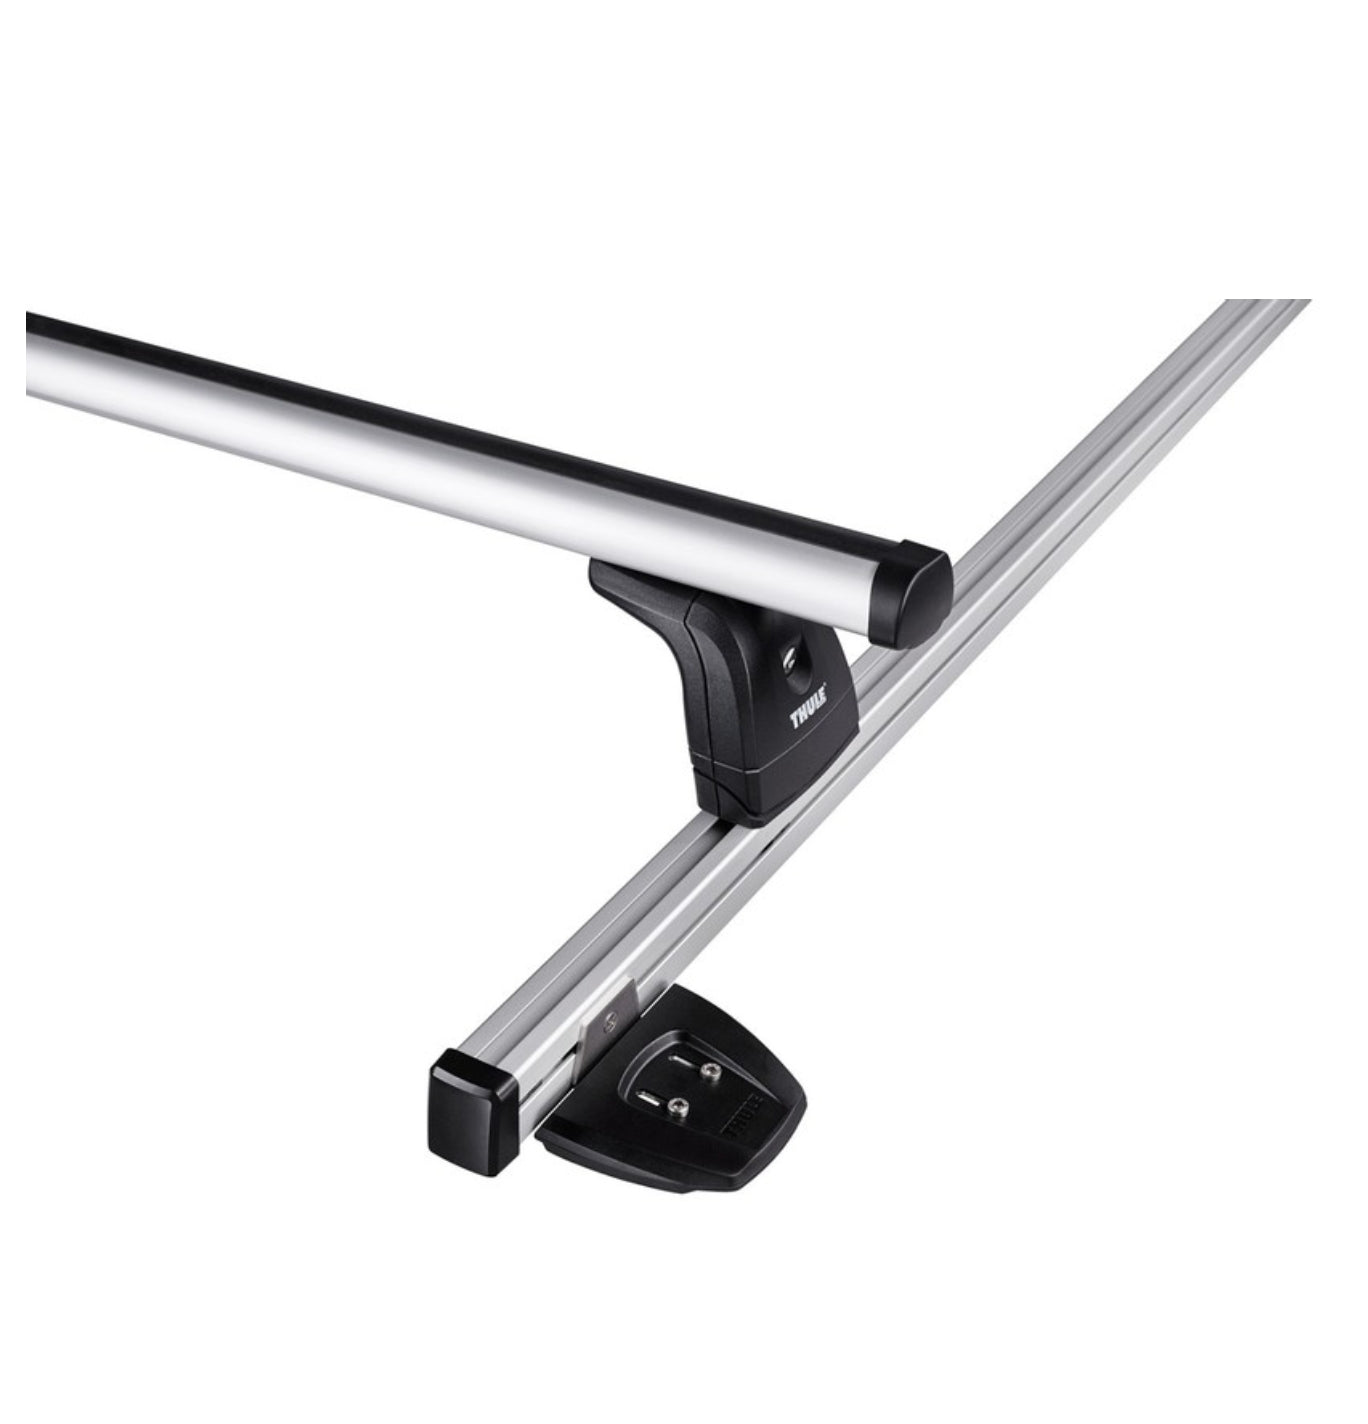 Thule SmartClamp Roof Rack Ducato Awning Pack System